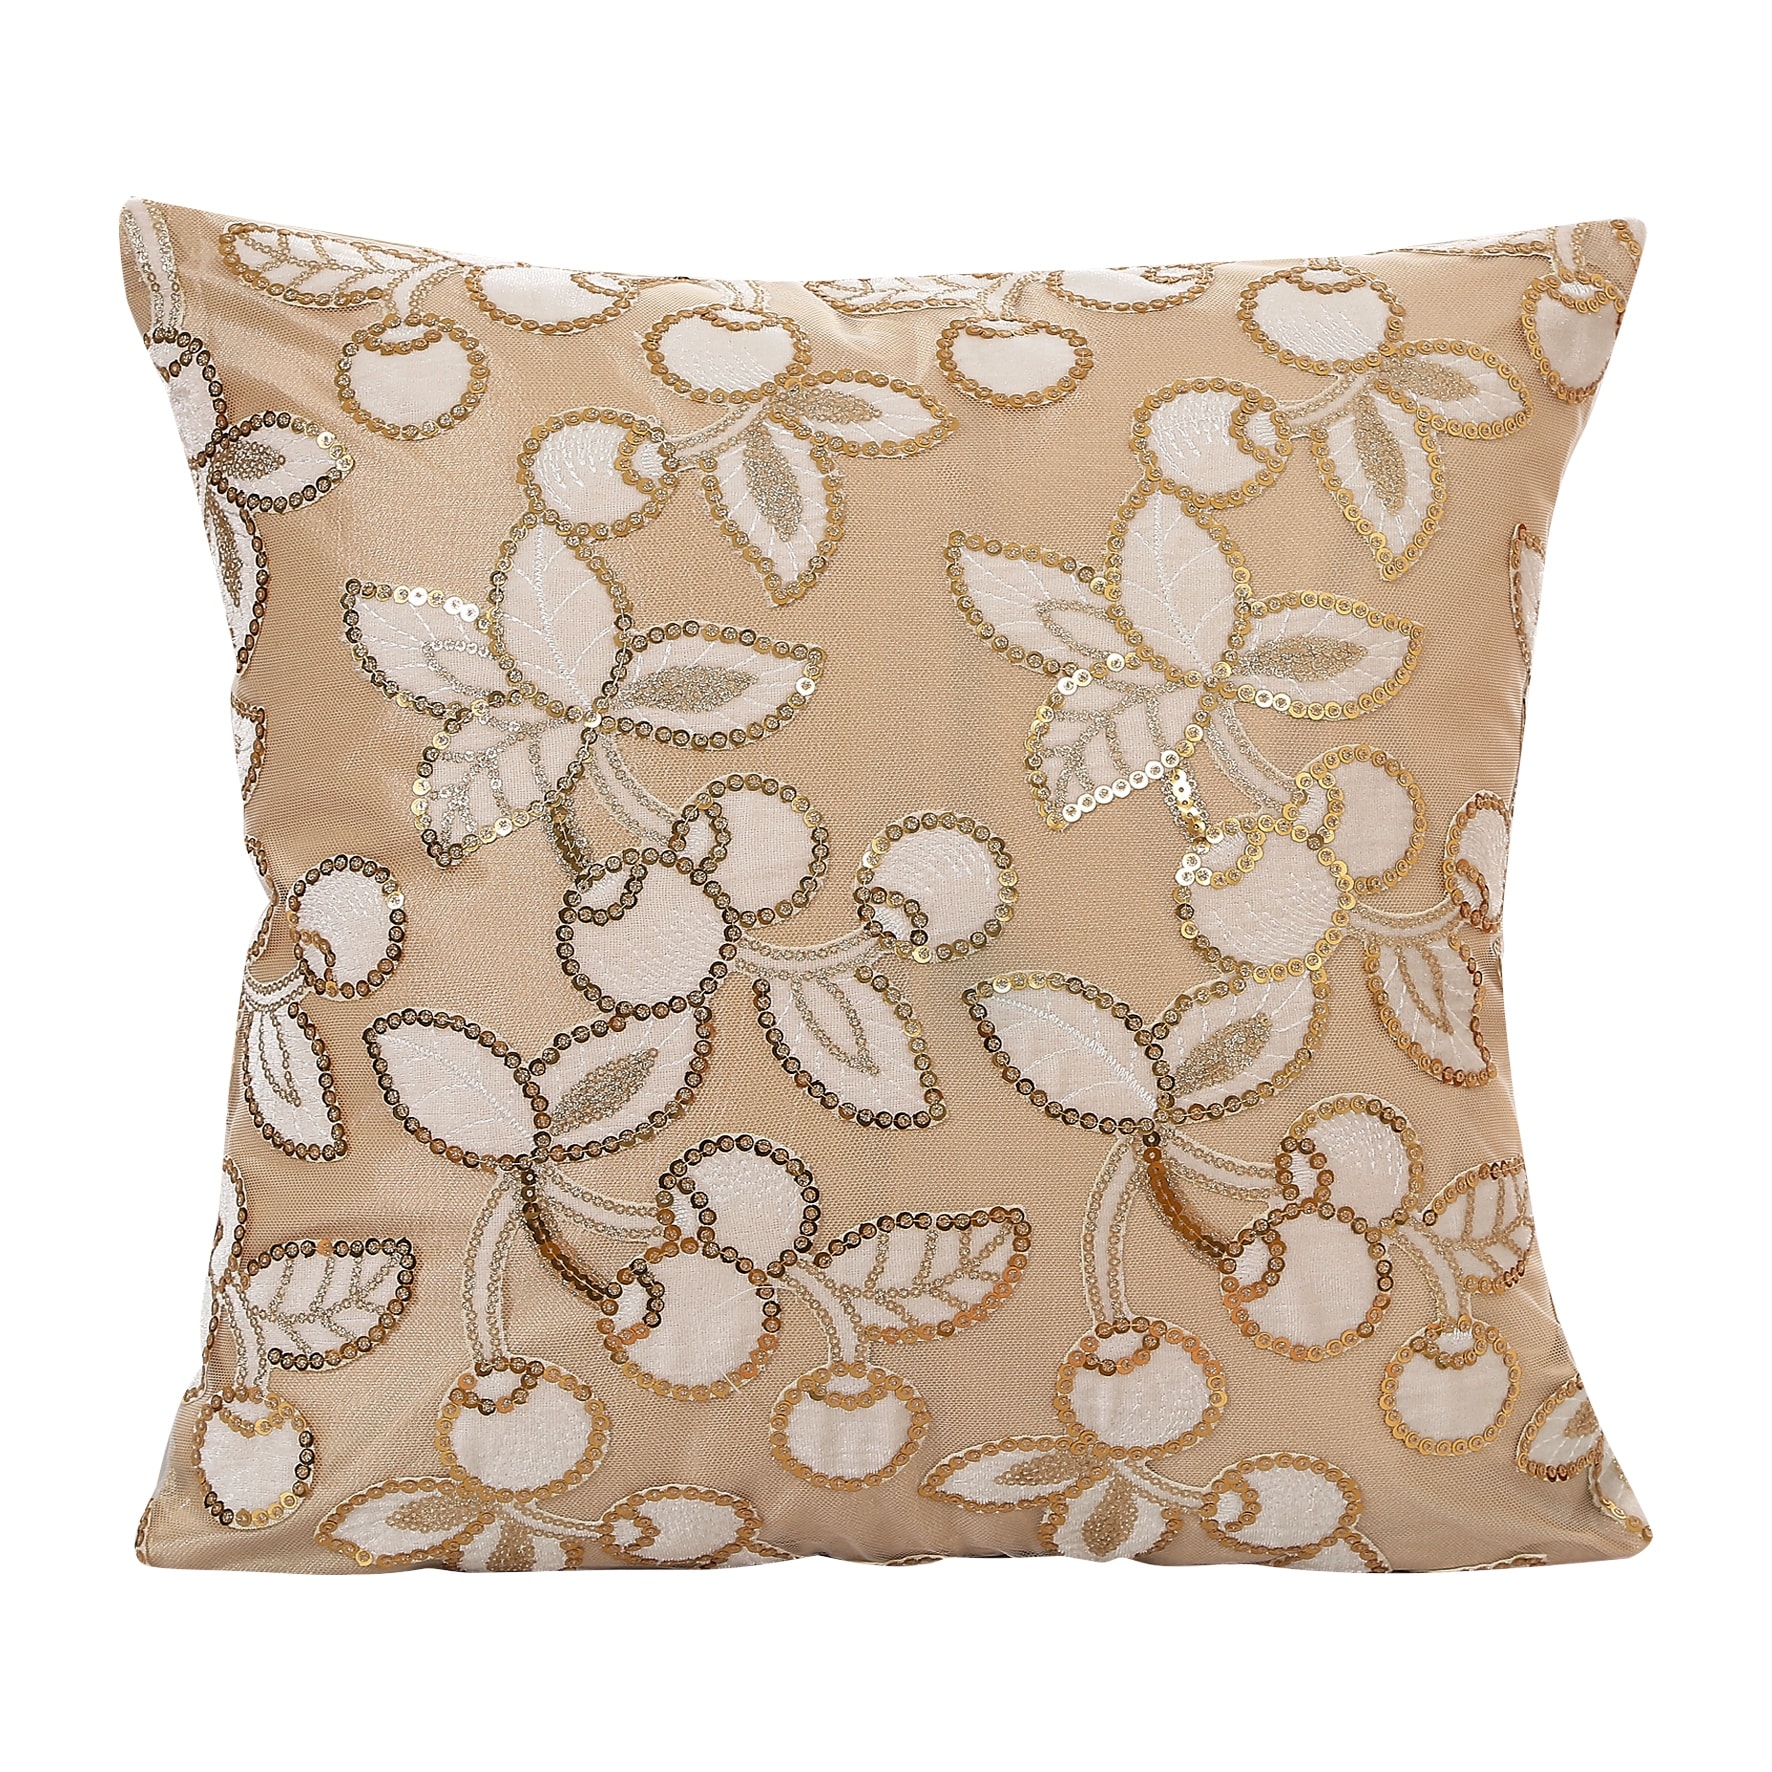 Violet Linen Heritage Vintage Cherry Flower Pattern , 18 Inch x 18 Inch, Square, Decorative Cushion Cover